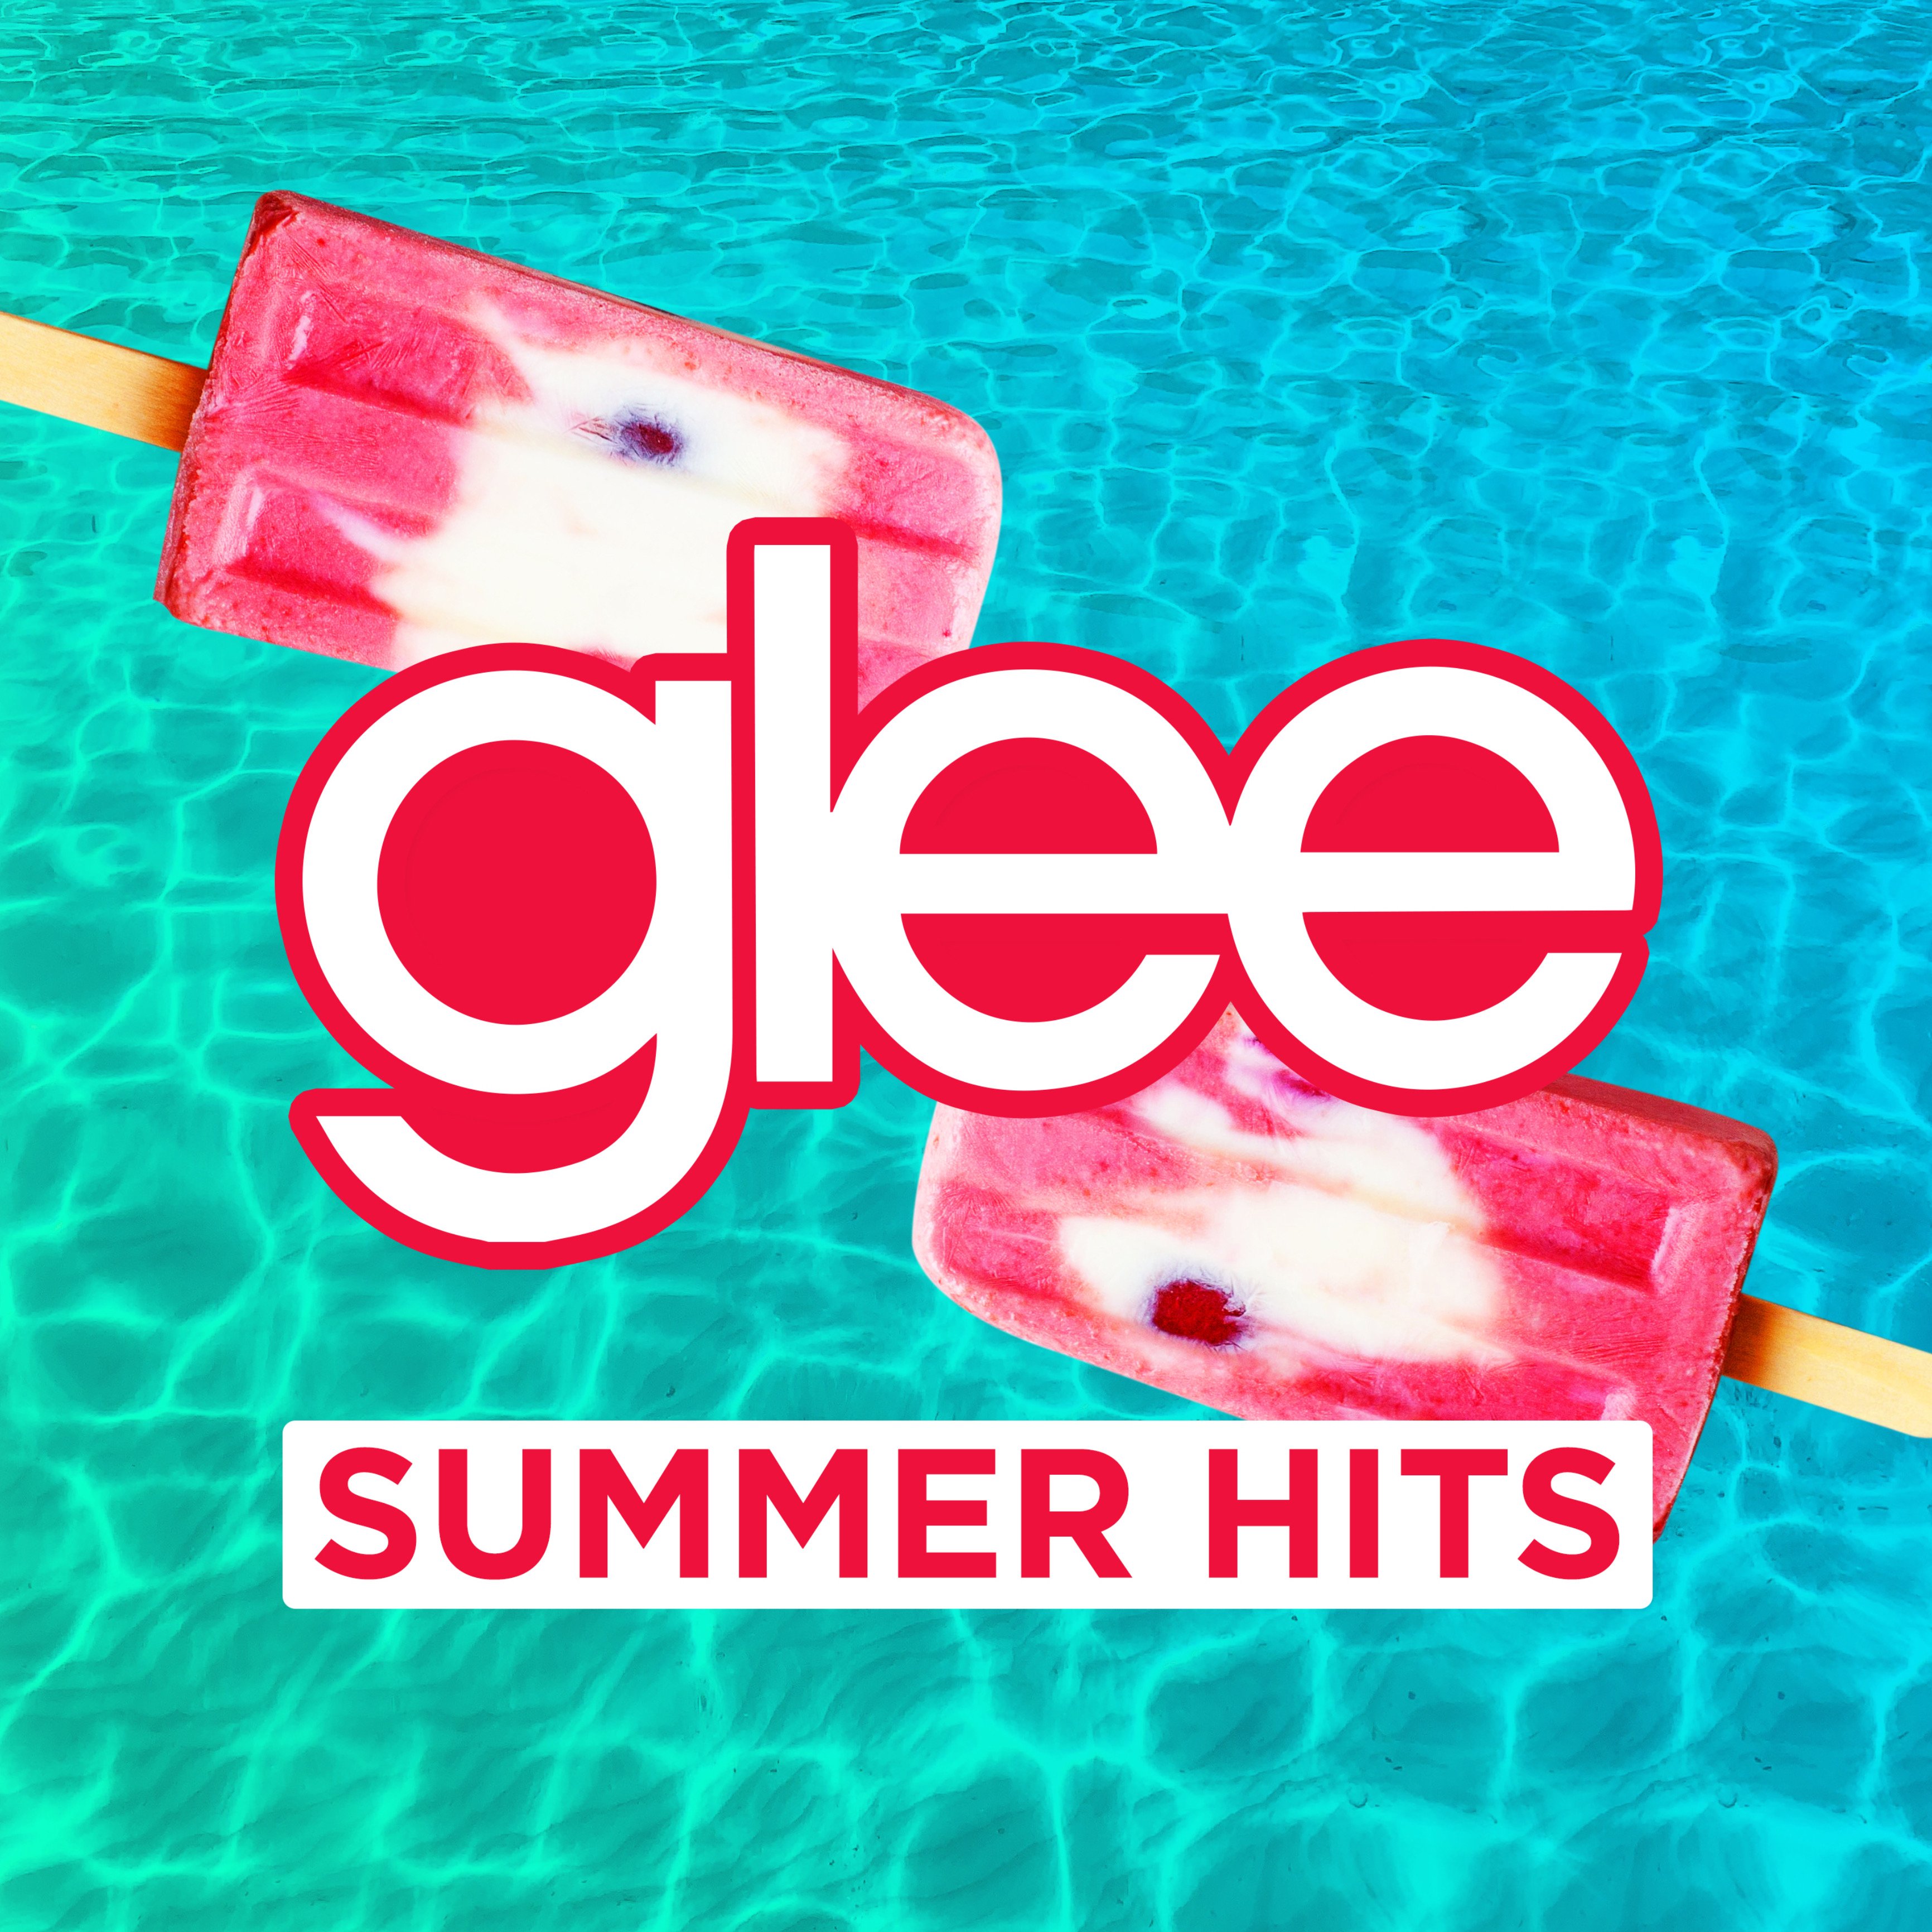 Paradise by the Dashboard Light — Glee Cast | Last.fm